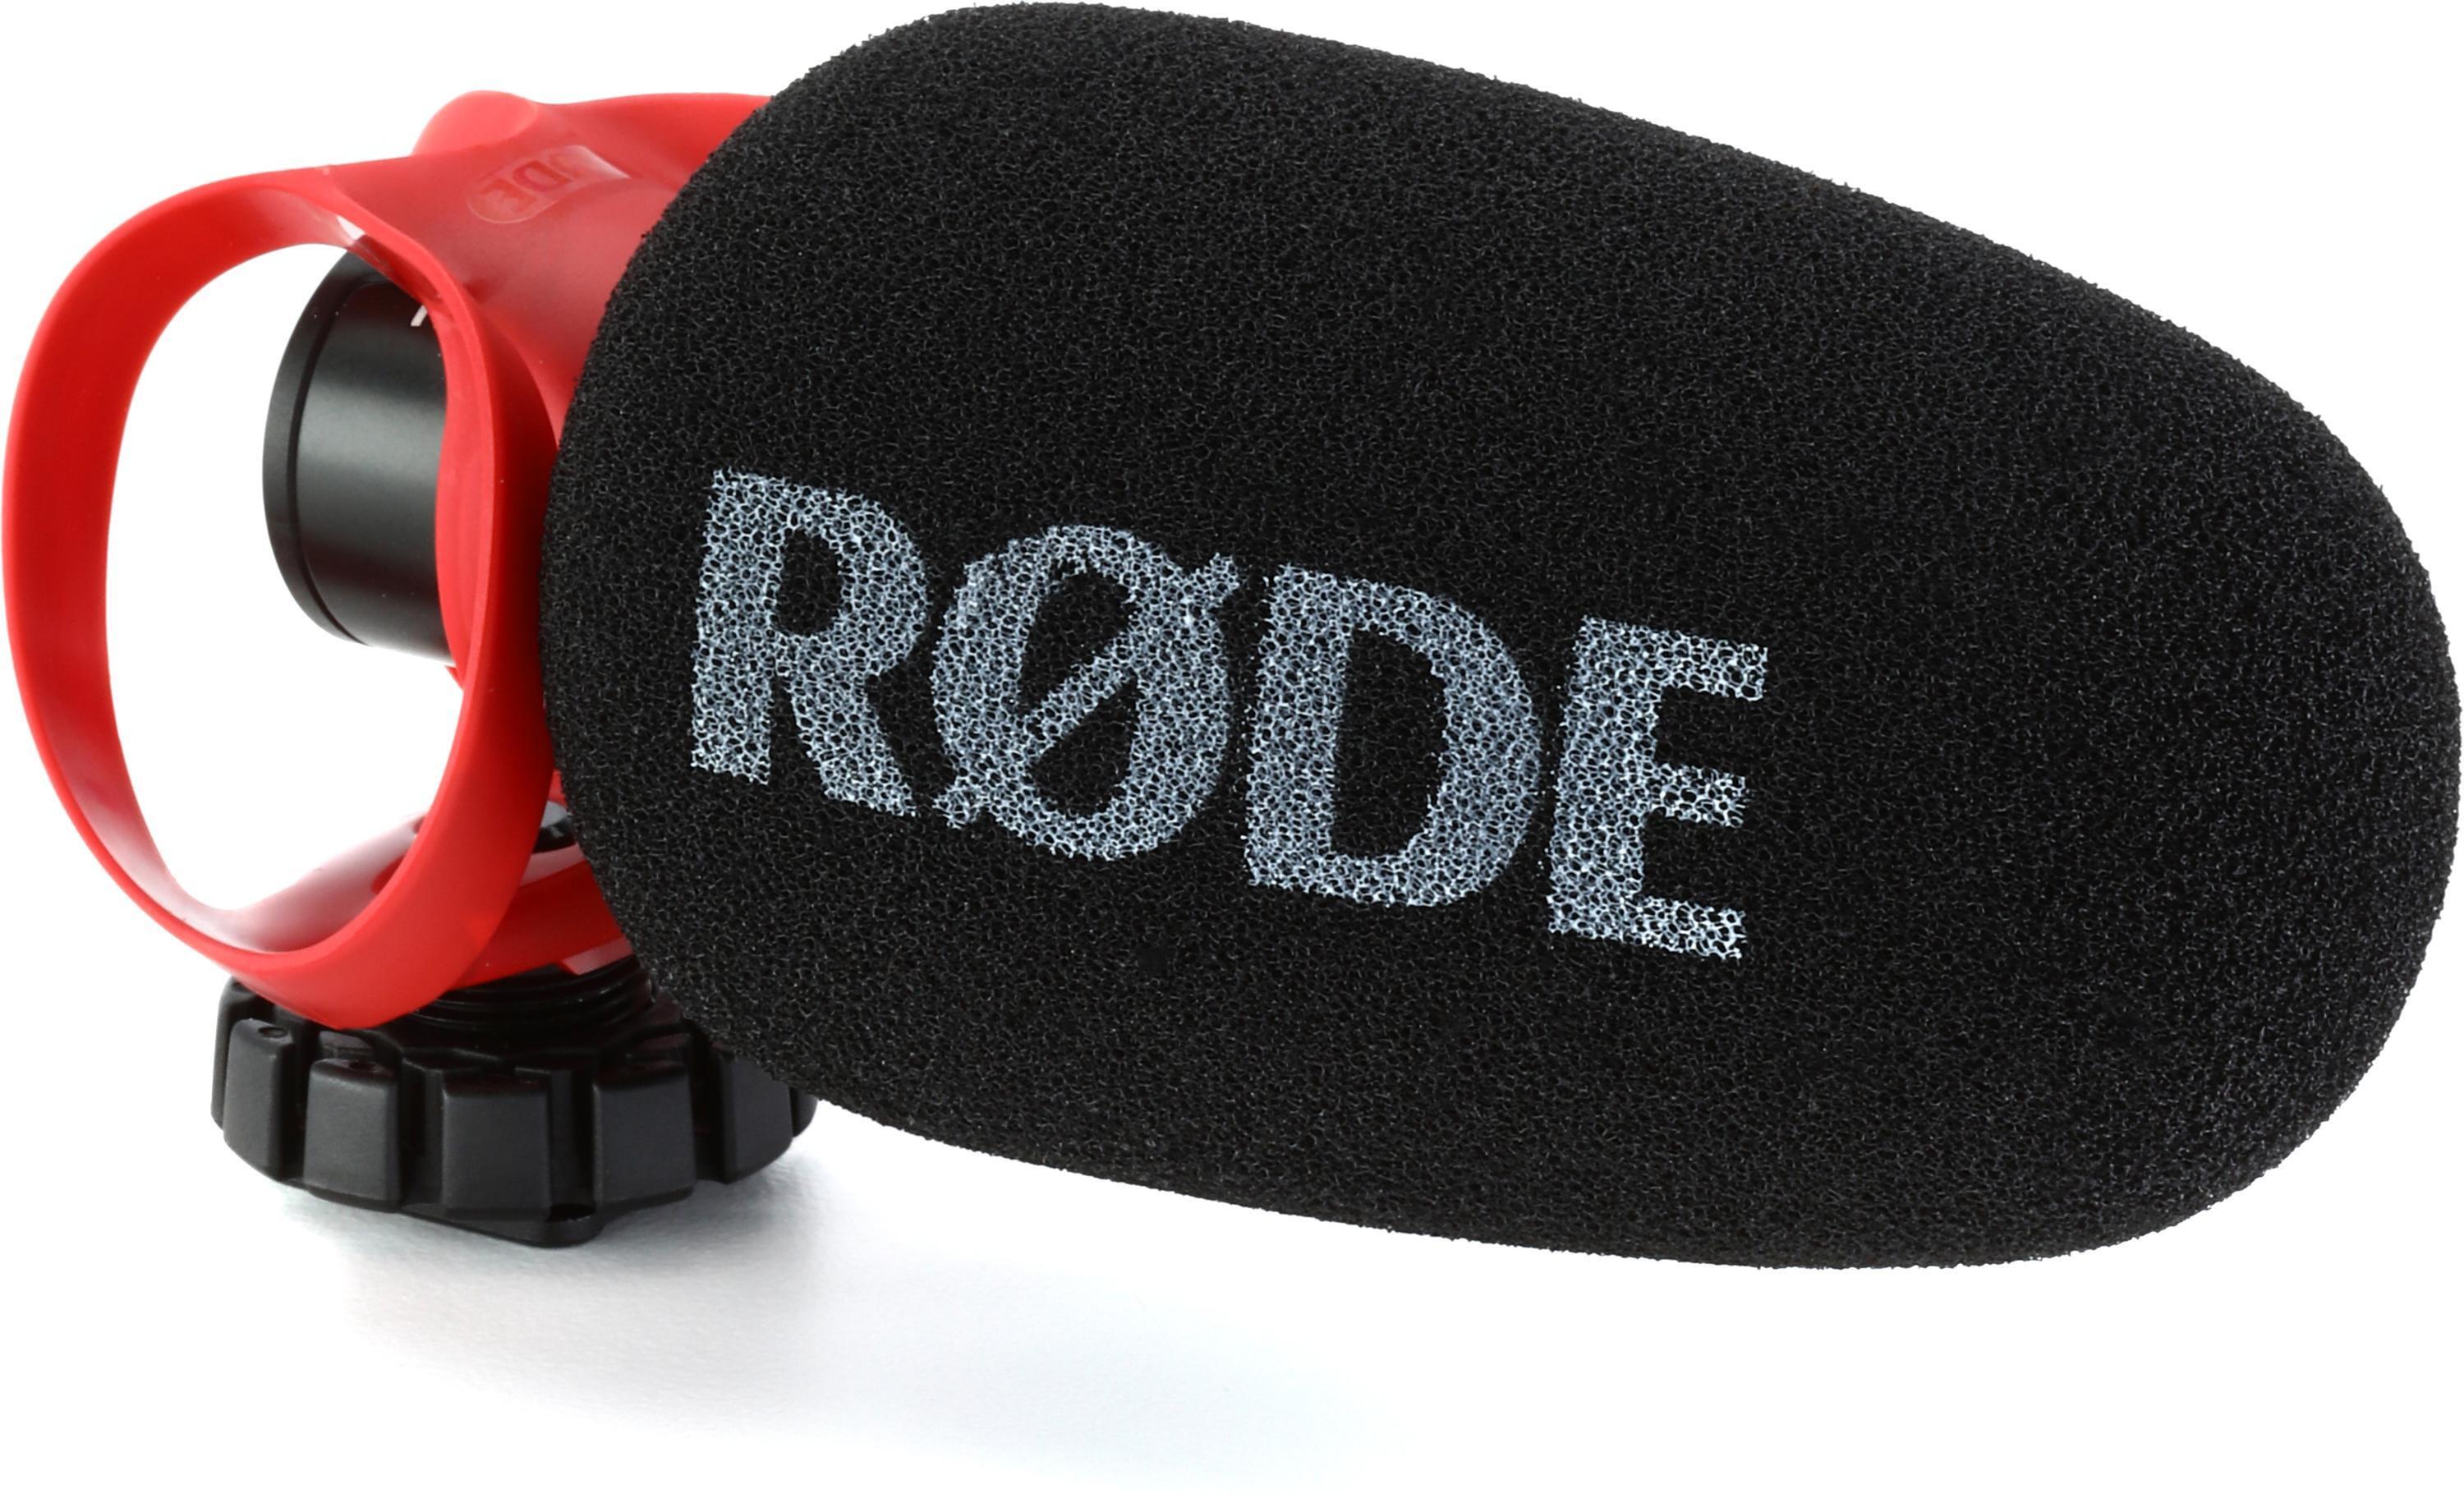 RODE VideoMic GO II review: a brilliant mic for beginners